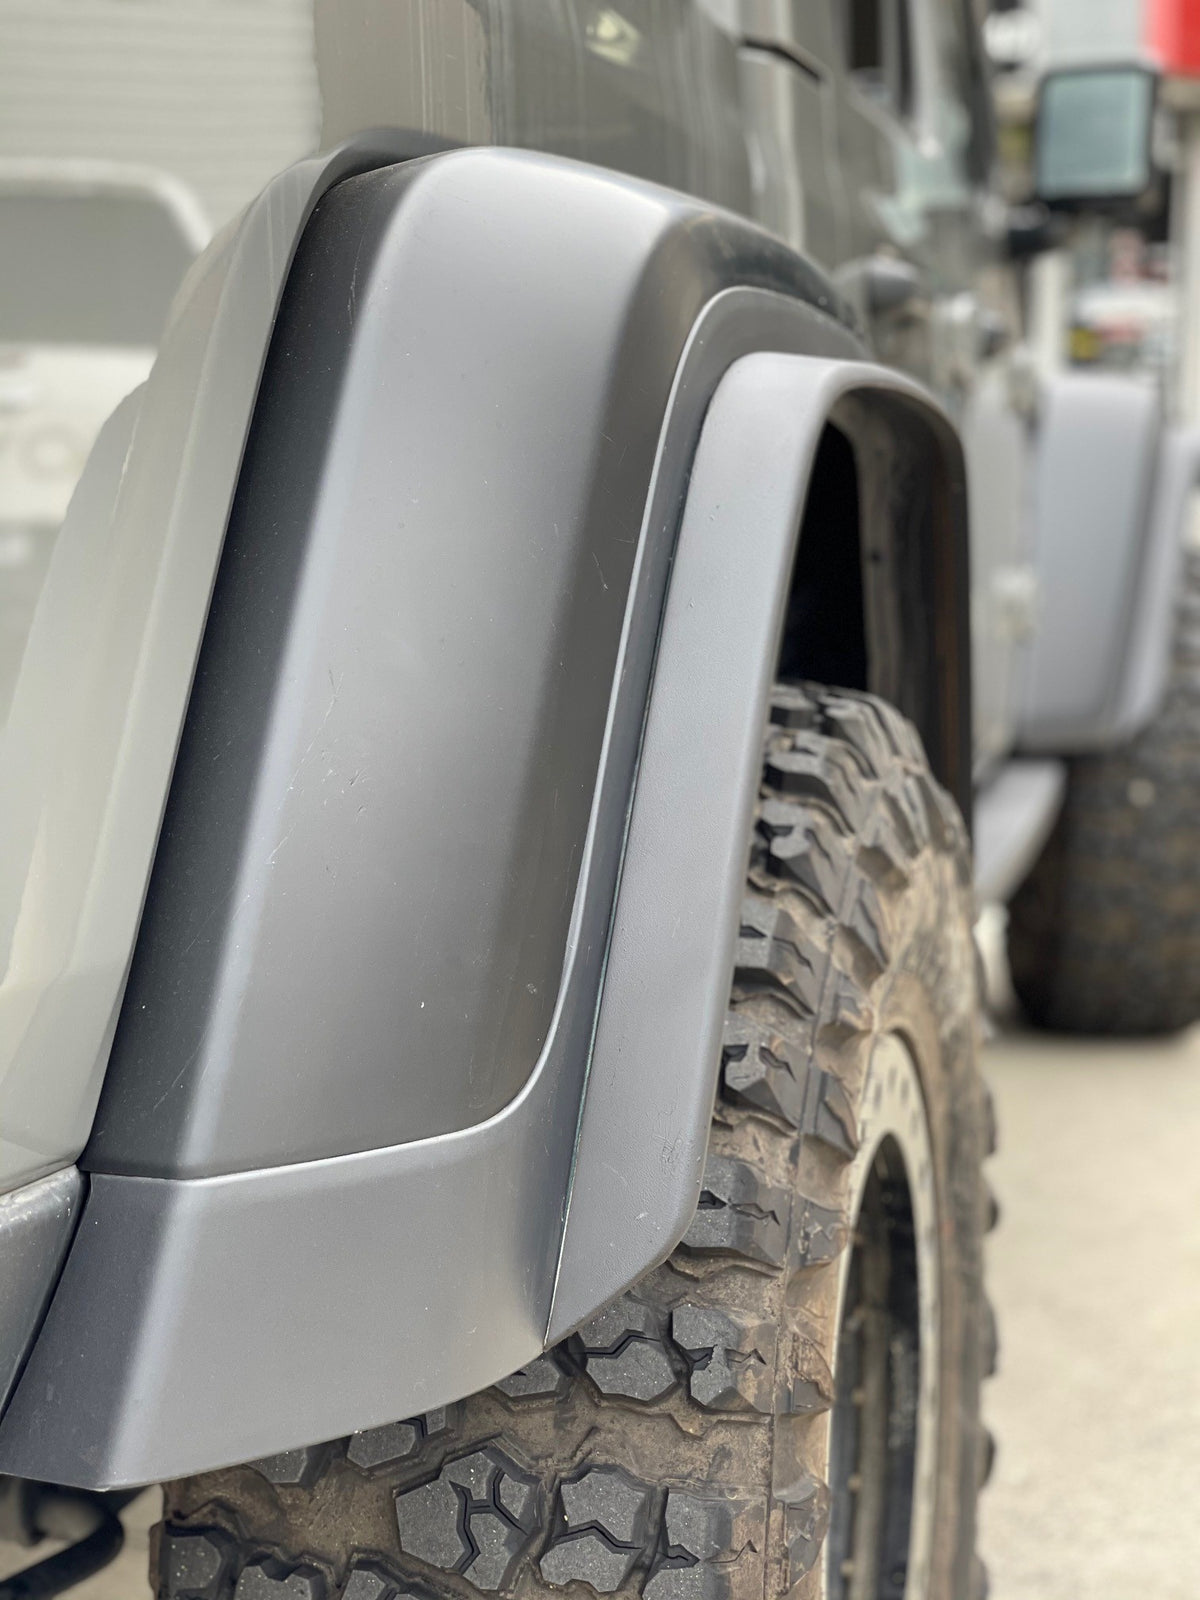 DBOR - US SPEC 2&quot; EXTENDED FENDERS JT GLADIATOR For Rubicon/Mojave